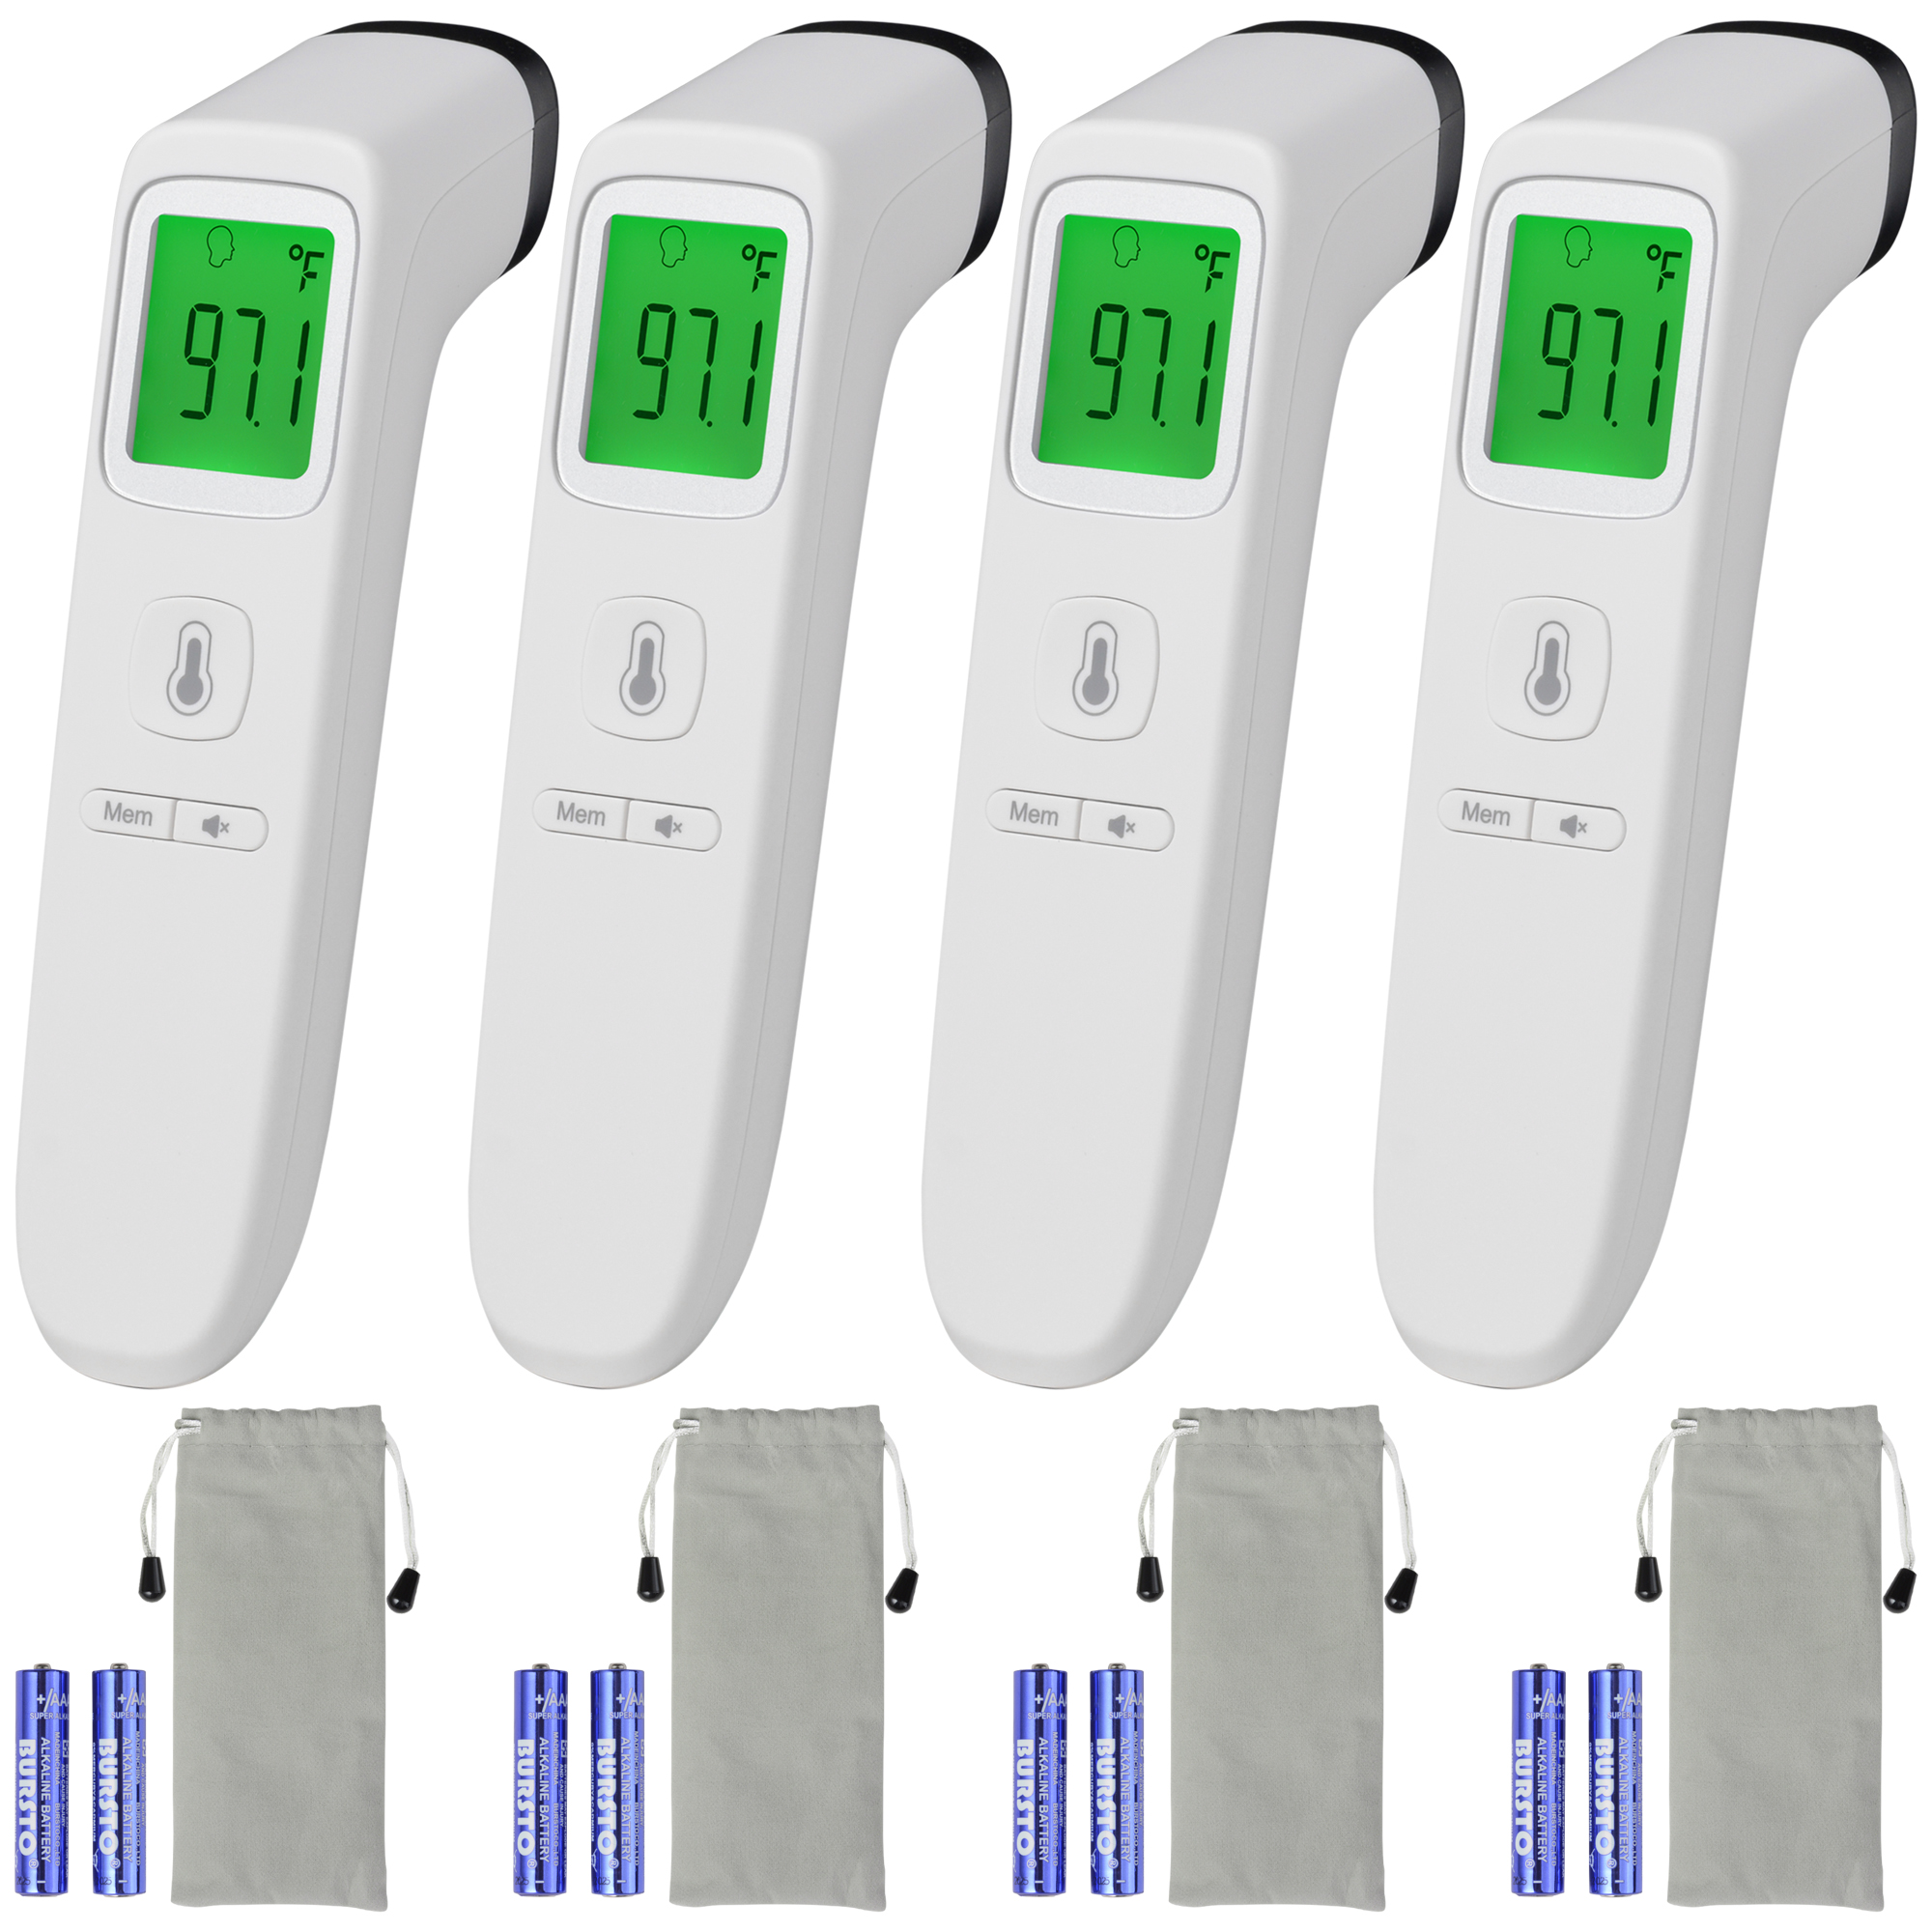 Yescom No Contact Digital Infrared Thermometer Measuring Body Memory Function 4 Pack